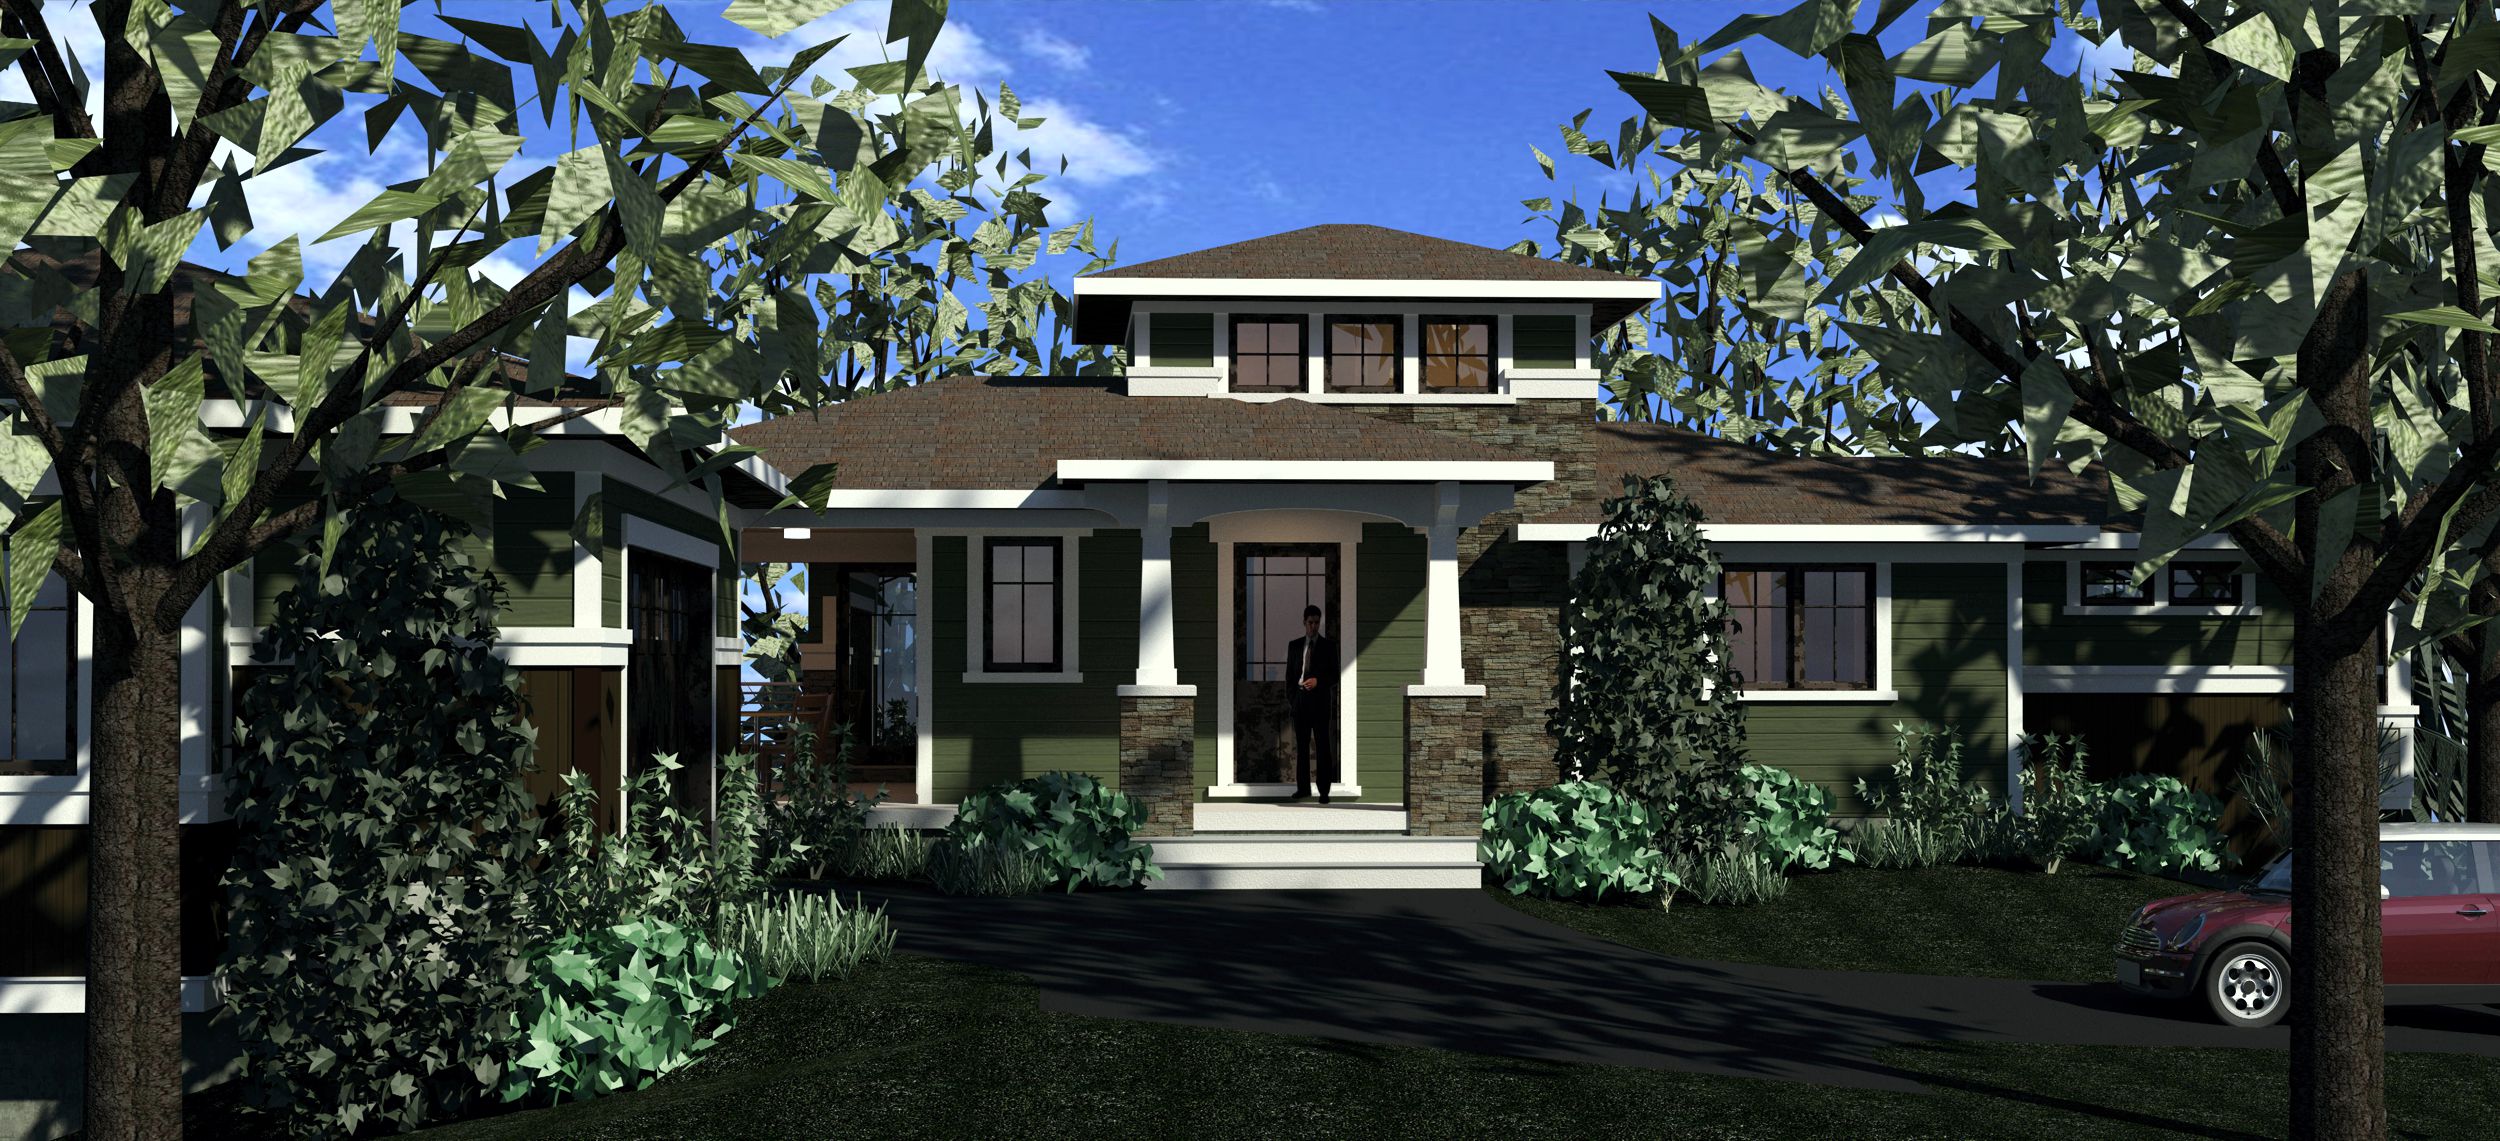 Color computer rendering of prairie style entry